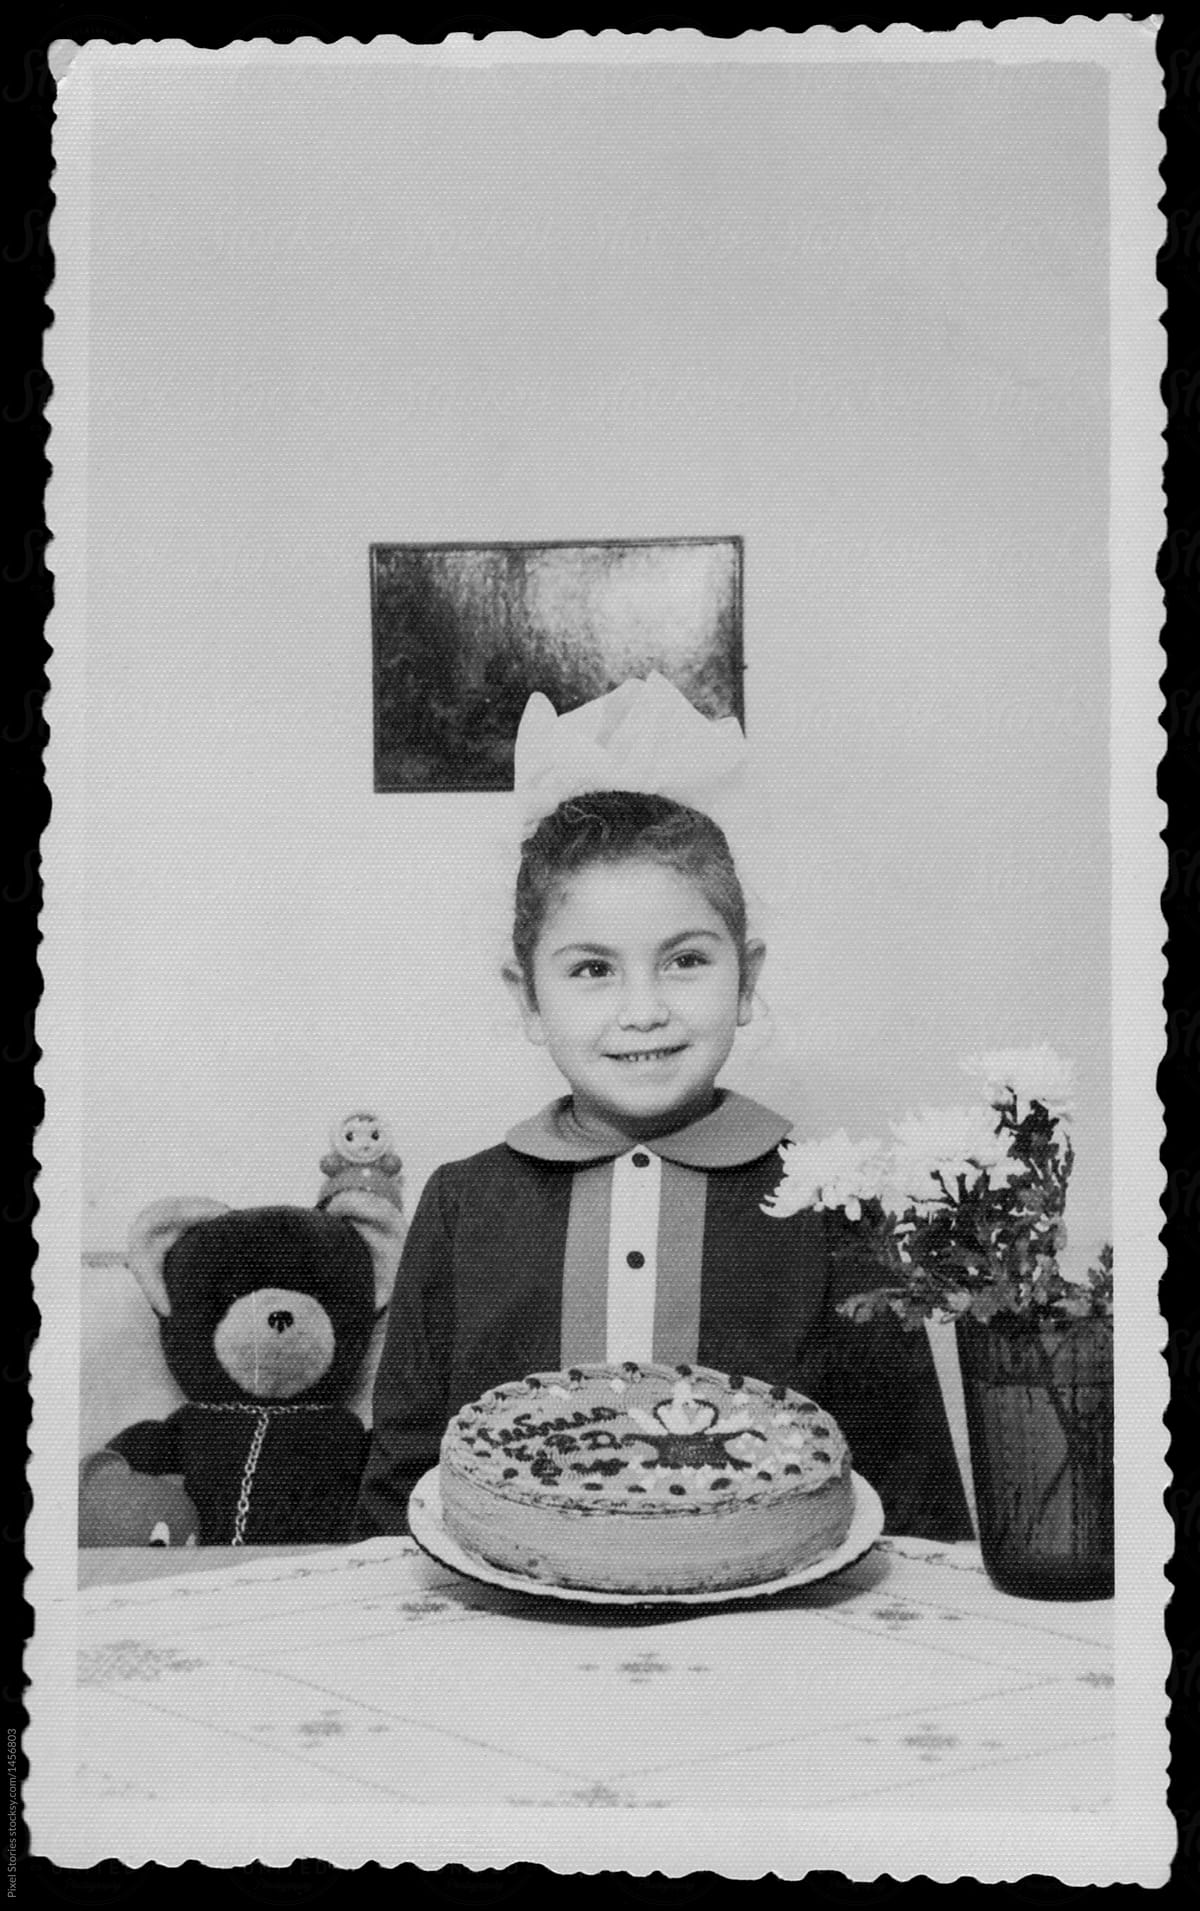 Young girl celebrating her birthday during the 60s